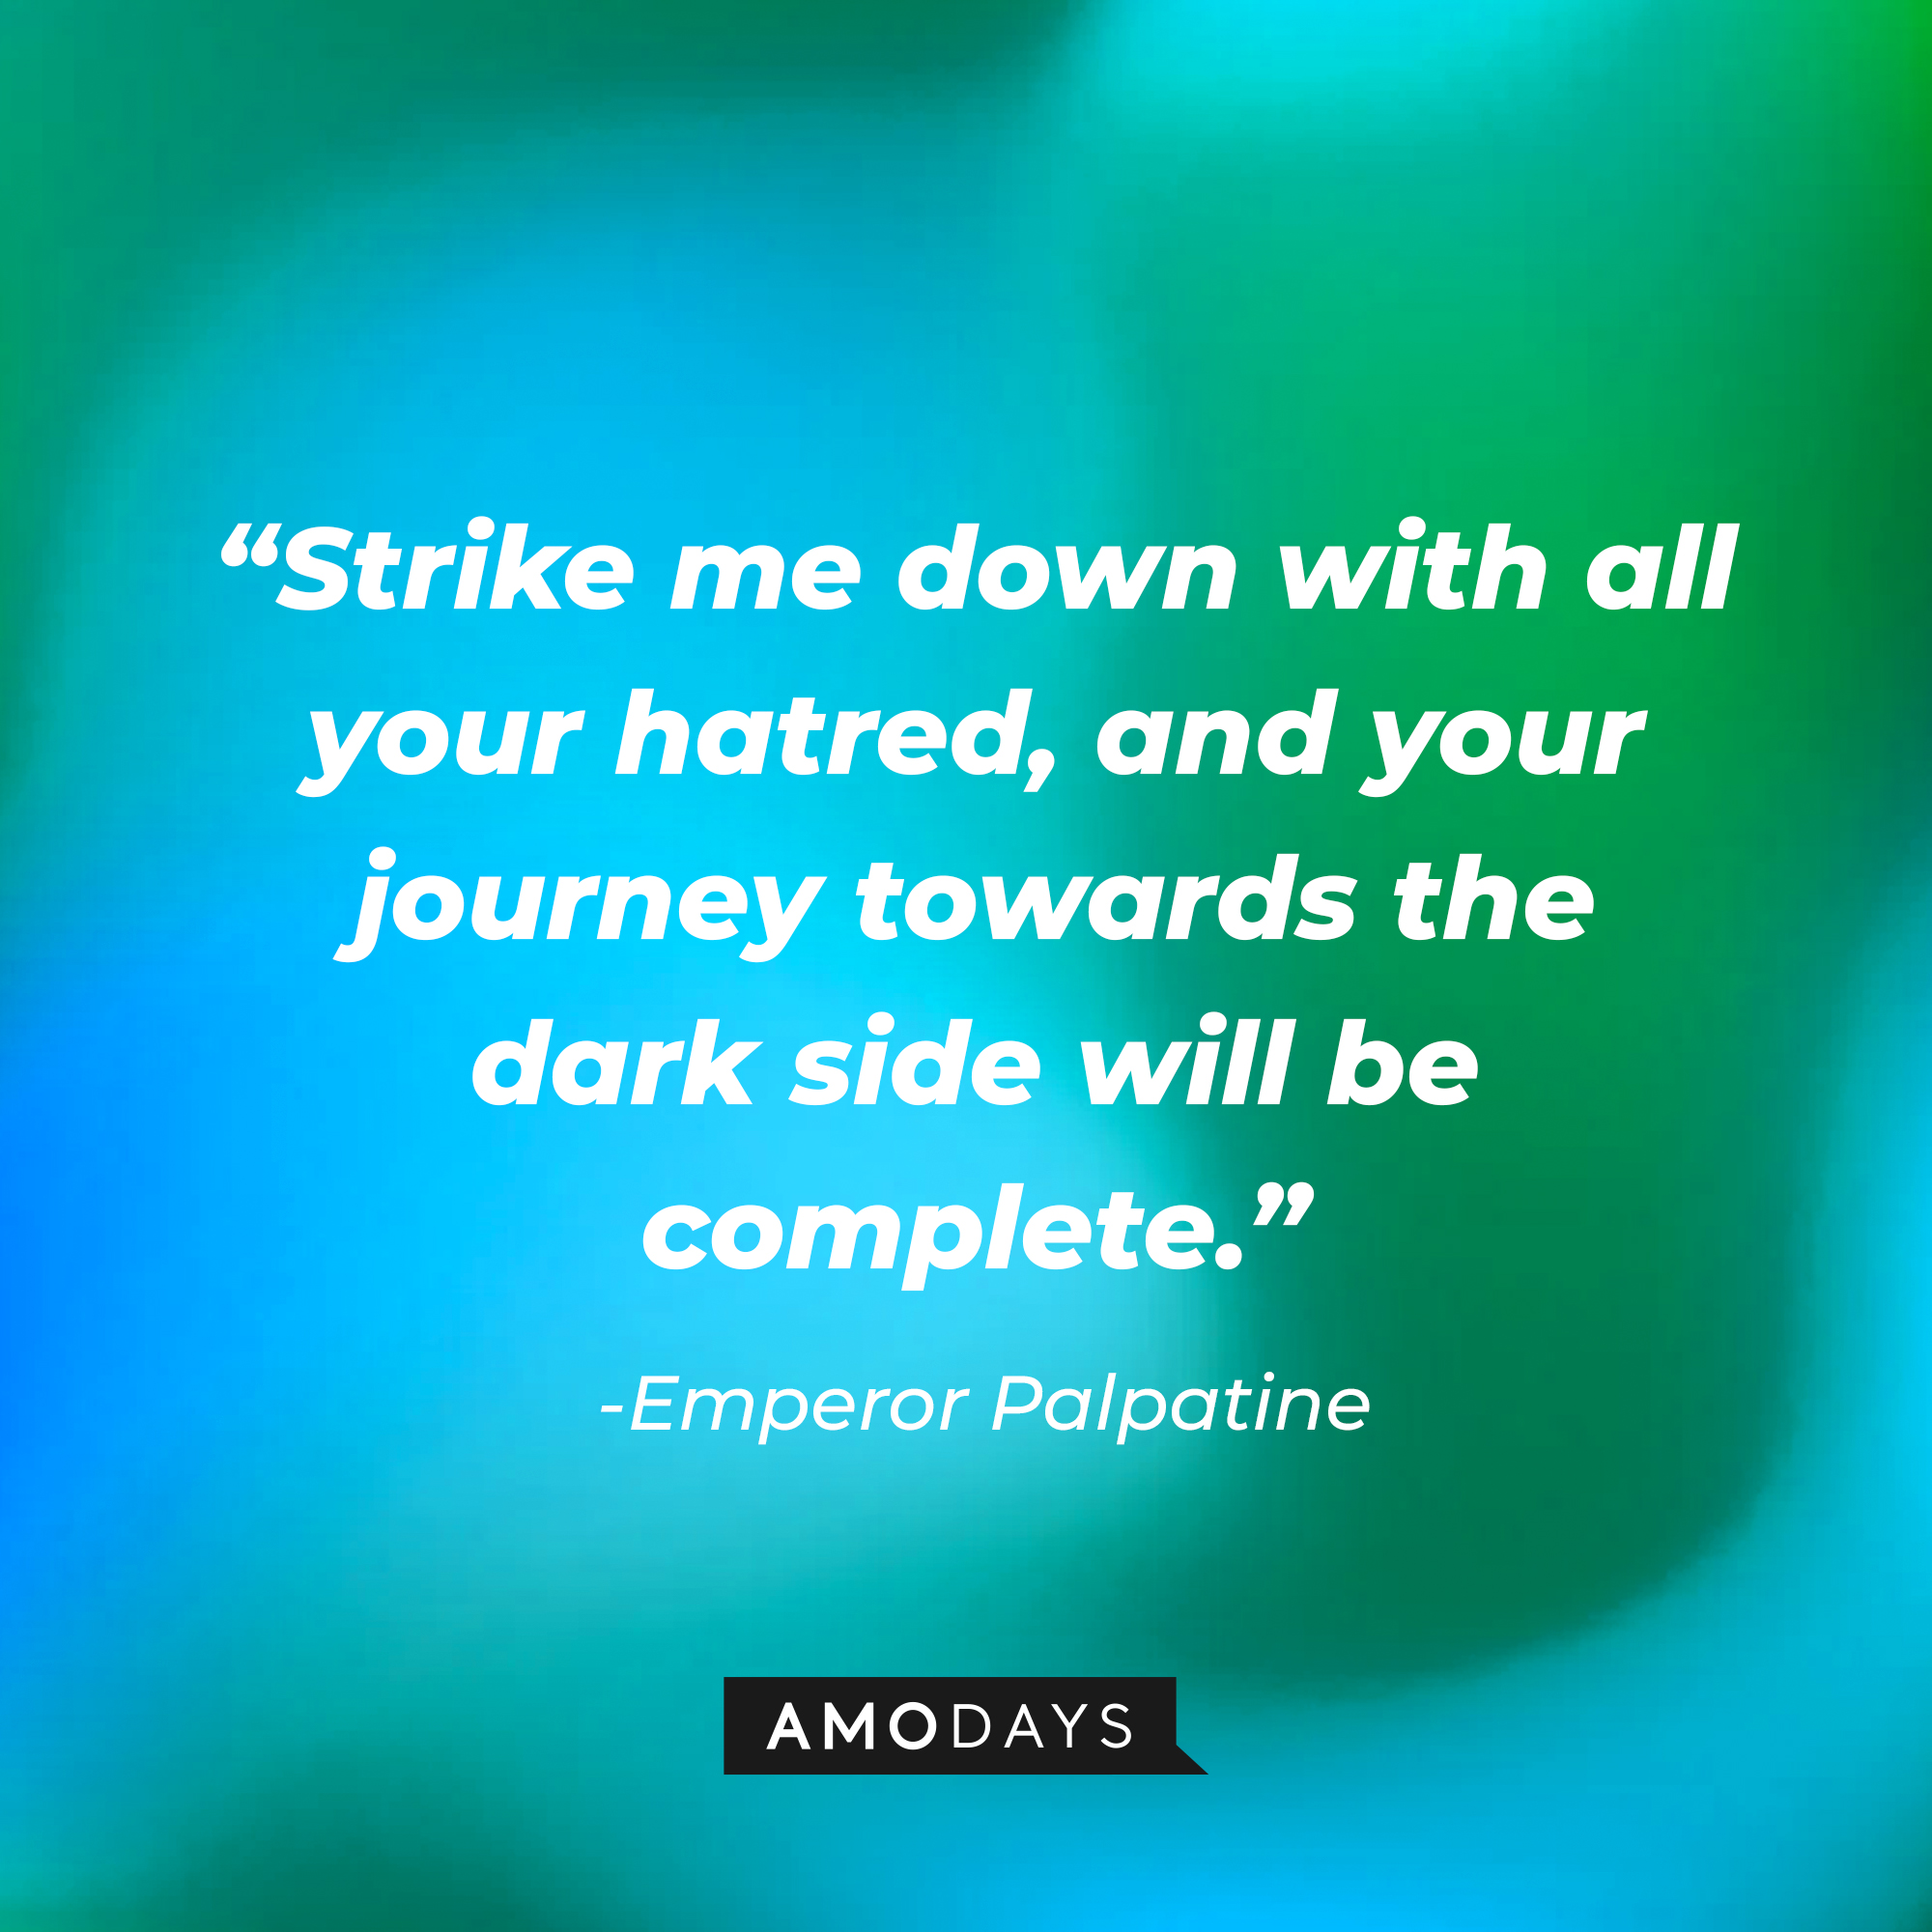 Emperor Palpatine’s quote: “Strike me down with all your hatred, and your journey towards the dark side will be complete.” | Source: AmoDays